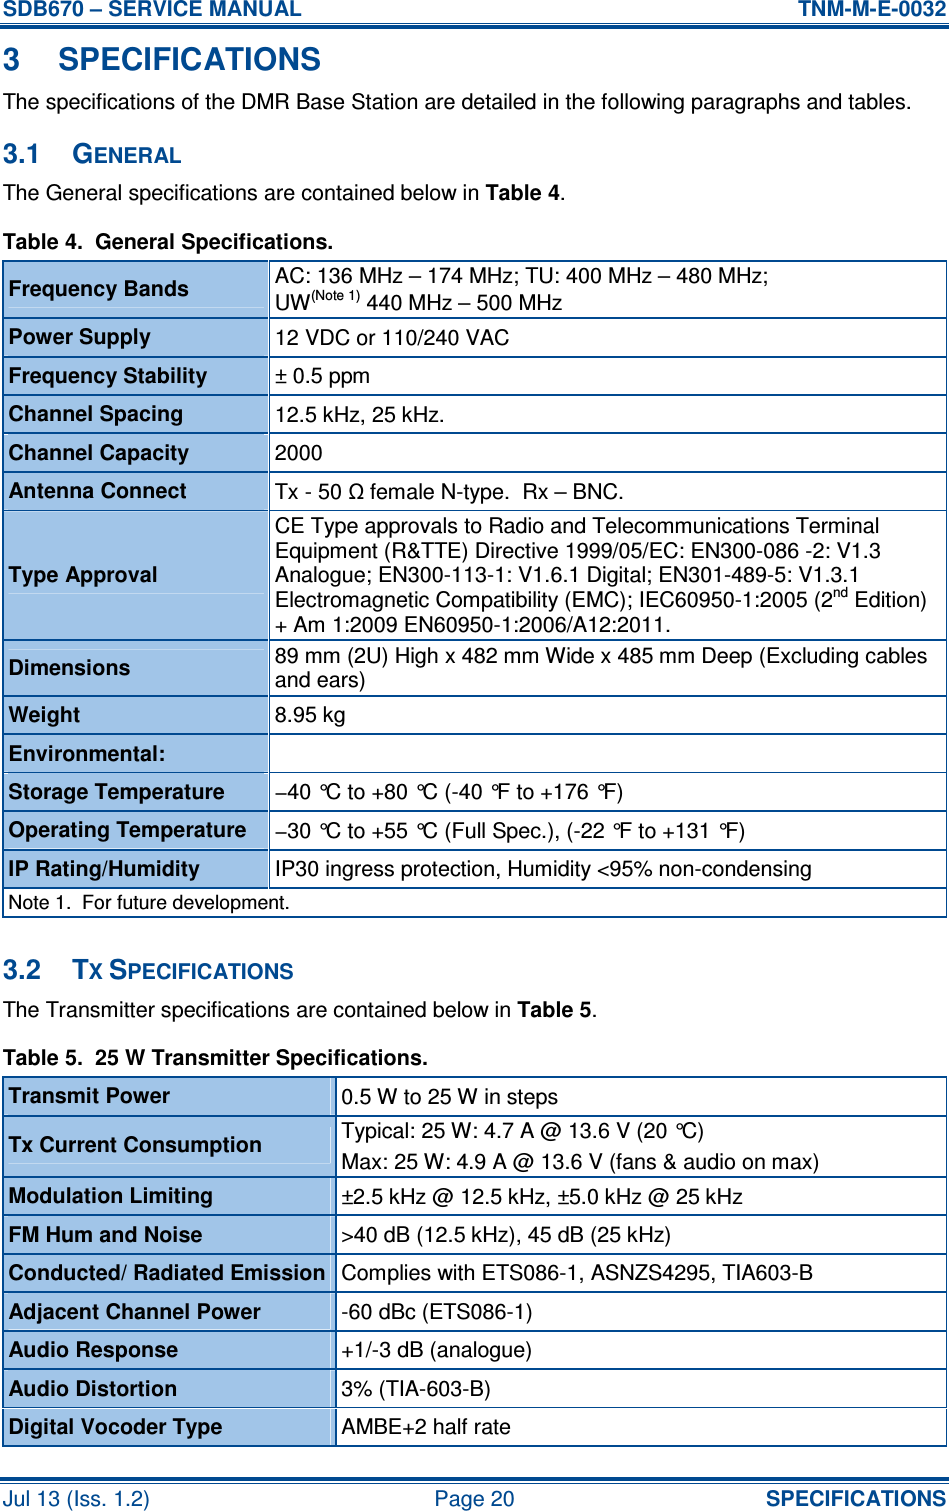 SDB670 – SERVICE MANUAL  TNM-M-E-0032 Jul 13 (Iss. 1.2)  Page 20  SPECIFICATIONS 3  SPECIFICATIONS The specifications of the DMR Base Station are detailed in the following paragraphs and tables. 3.1  GENERAL The General specifications are contained below in Table 4. Table 4.  General Specifications. Frequency Bands  AC: 136 MHz – 174 MHz; TU: 400 MHz – 480 MHz; UW(Note 1) 440 MHz – 500 MHz Power Supply  12 VDC or 110/240 VAC  Frequency Stability  ± 0.5 ppm Channel Spacing  12.5 kHz, 25 kHz. Channel Capacity  2000 Antenna Connect  Tx - 50 Ω female N-type.  Rx – BNC. Type Approval CE Type approvals to Radio and Telecommunications Terminal Equipment (R&amp;TTE) Directive 1999/05/EC: EN300-086 -2: V1.3 Analogue; EN300-113-1: V1.6.1 Digital; EN301-489-5: V1.3.1 Electromagnetic Compatibility (EMC); IEC60950-1:2005 (2nd Edition) + Am 1:2009 EN60950-1:2006/A12:2011. Dimensions  89 mm (2U) High x 482 mm Wide x 485 mm Deep (Excluding cables and ears) Weight  8.95 kg Environmental:   Storage Temperature  −40 °C to +80 °C (-40 °F to +176 °F) Operating Temperature  −30 °C to +55 °C (Full Spec.), (-22 °F to +131 °F) IP Rating/Humidity  IP30 ingress protection, Humidity &lt;95% non-condensing Note 1.  For future development.  3.2  TX SPECIFICATIONS The Transmitter specifications are contained below in Table 5. Table 5.  25 W Transmitter Specifications. Transmit Power  0.5 W to 25 W in steps Typical: 25 W: 4.7 A @ 13.6 V (20 °C) Tx Current Consumption  Max: 25 W: 4.9 A @ 13.6 V (fans &amp; audio on max) Modulation Limiting  ±2.5 kHz @ 12.5 kHz, ±5.0 kHz @ 25 kHz FM Hum and Noise  &gt;40 dB (12.5 kHz), 45 dB (25 kHz) Conducted/ Radiated Emission Complies with ETS086-1, ASNZS4295, TIA603-B Adjacent Channel Power  -60 dBc (ETS086-1) Audio Response  +1/-3 dB (analogue) Audio Distortion  3% (TIA-603-B) Digital Vocoder Type  AMBE+2 half rate 